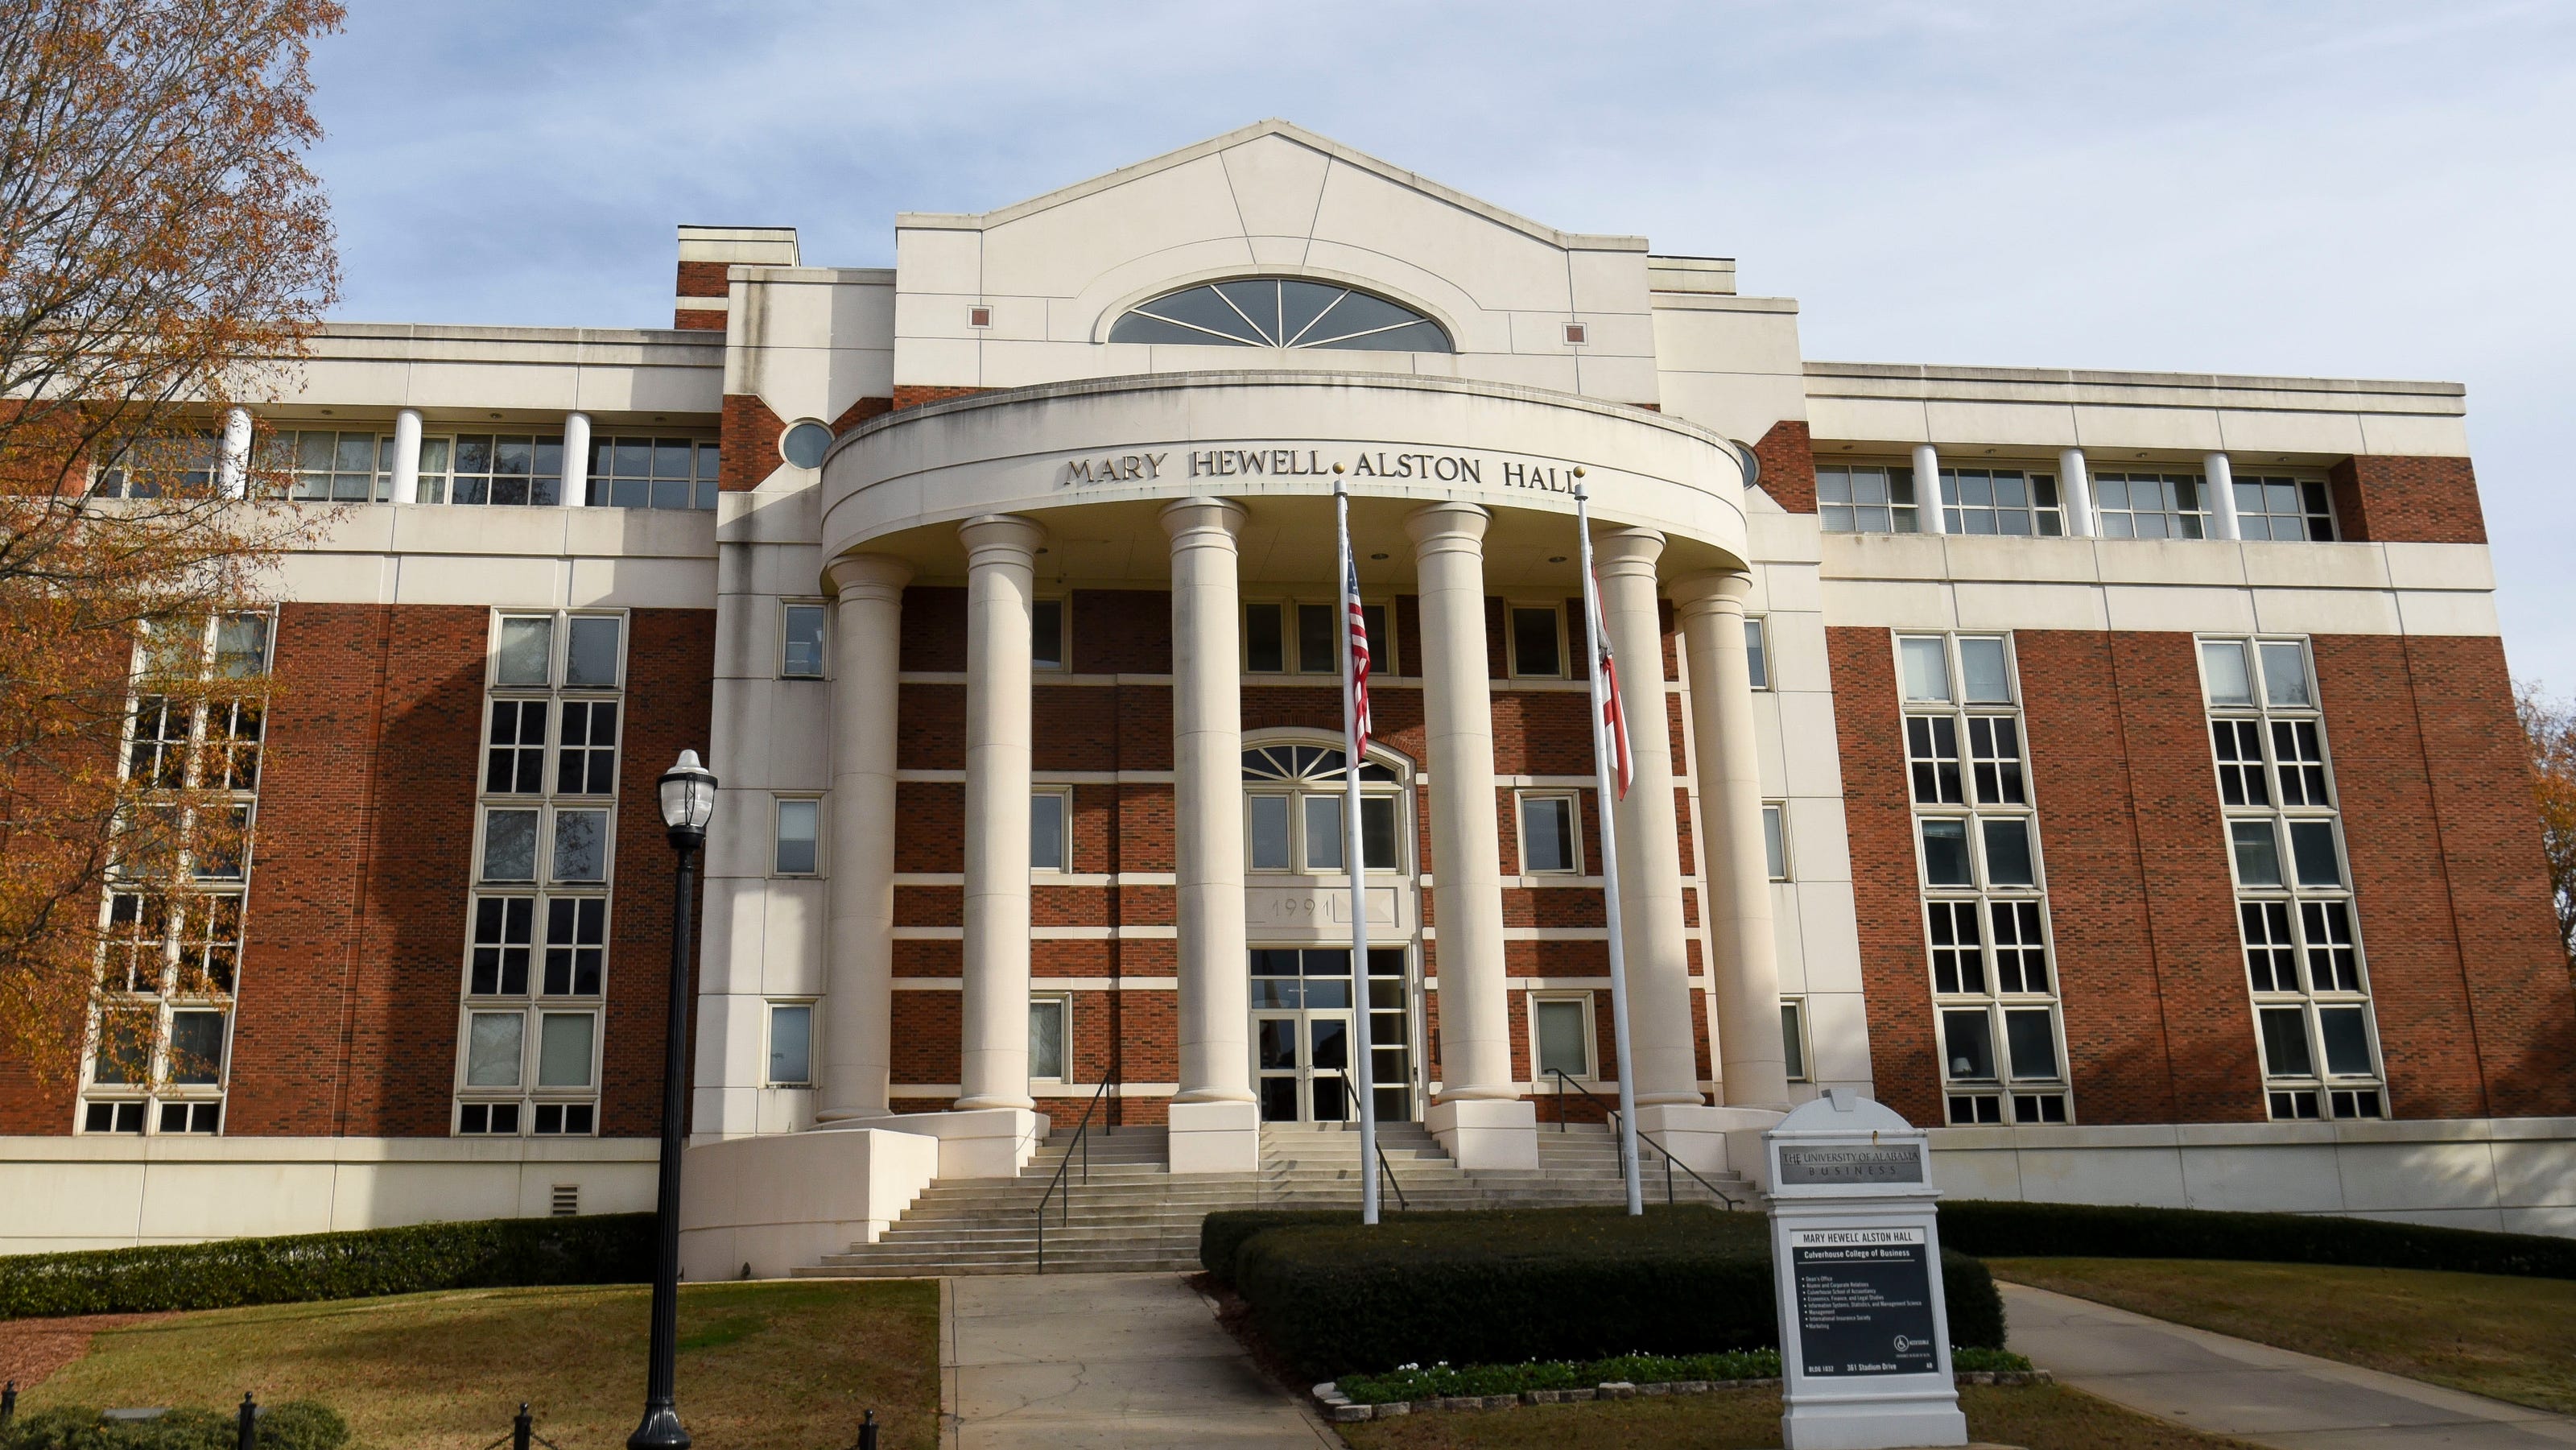  University of Alabama to raise $4M for business school building renovation 